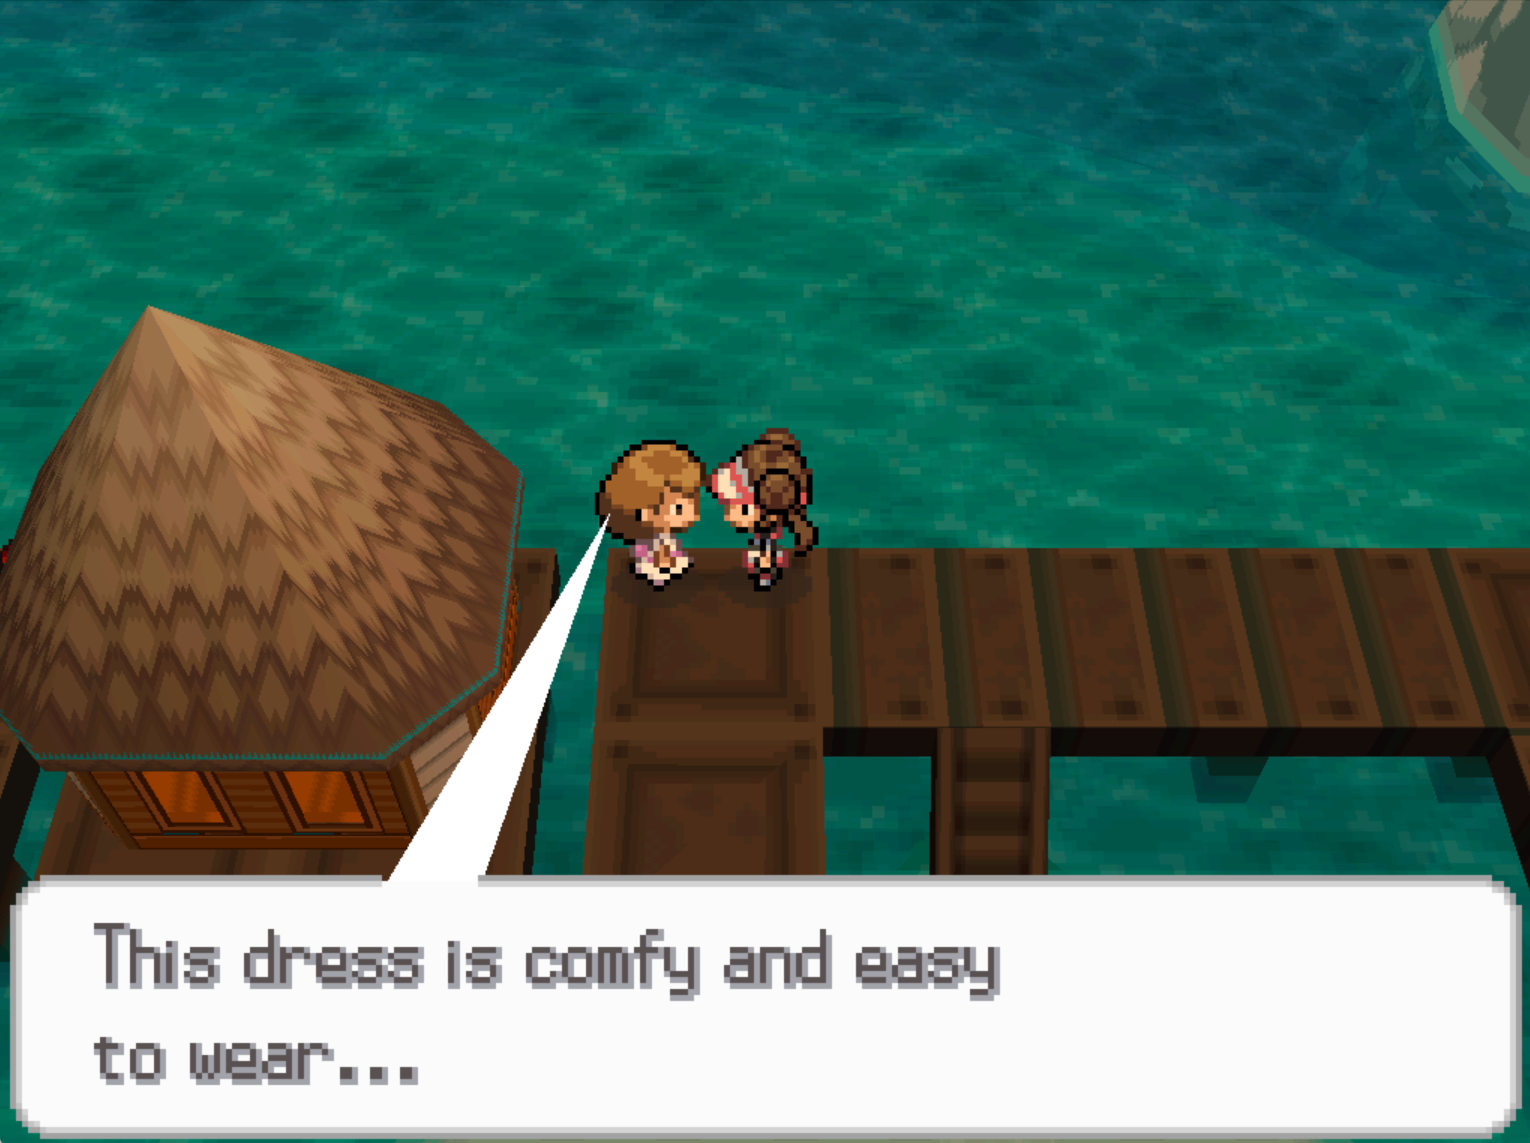 Screenshot from Pokémon Black 2 of an NPC saying "This dress is comfy and easy to wear..."